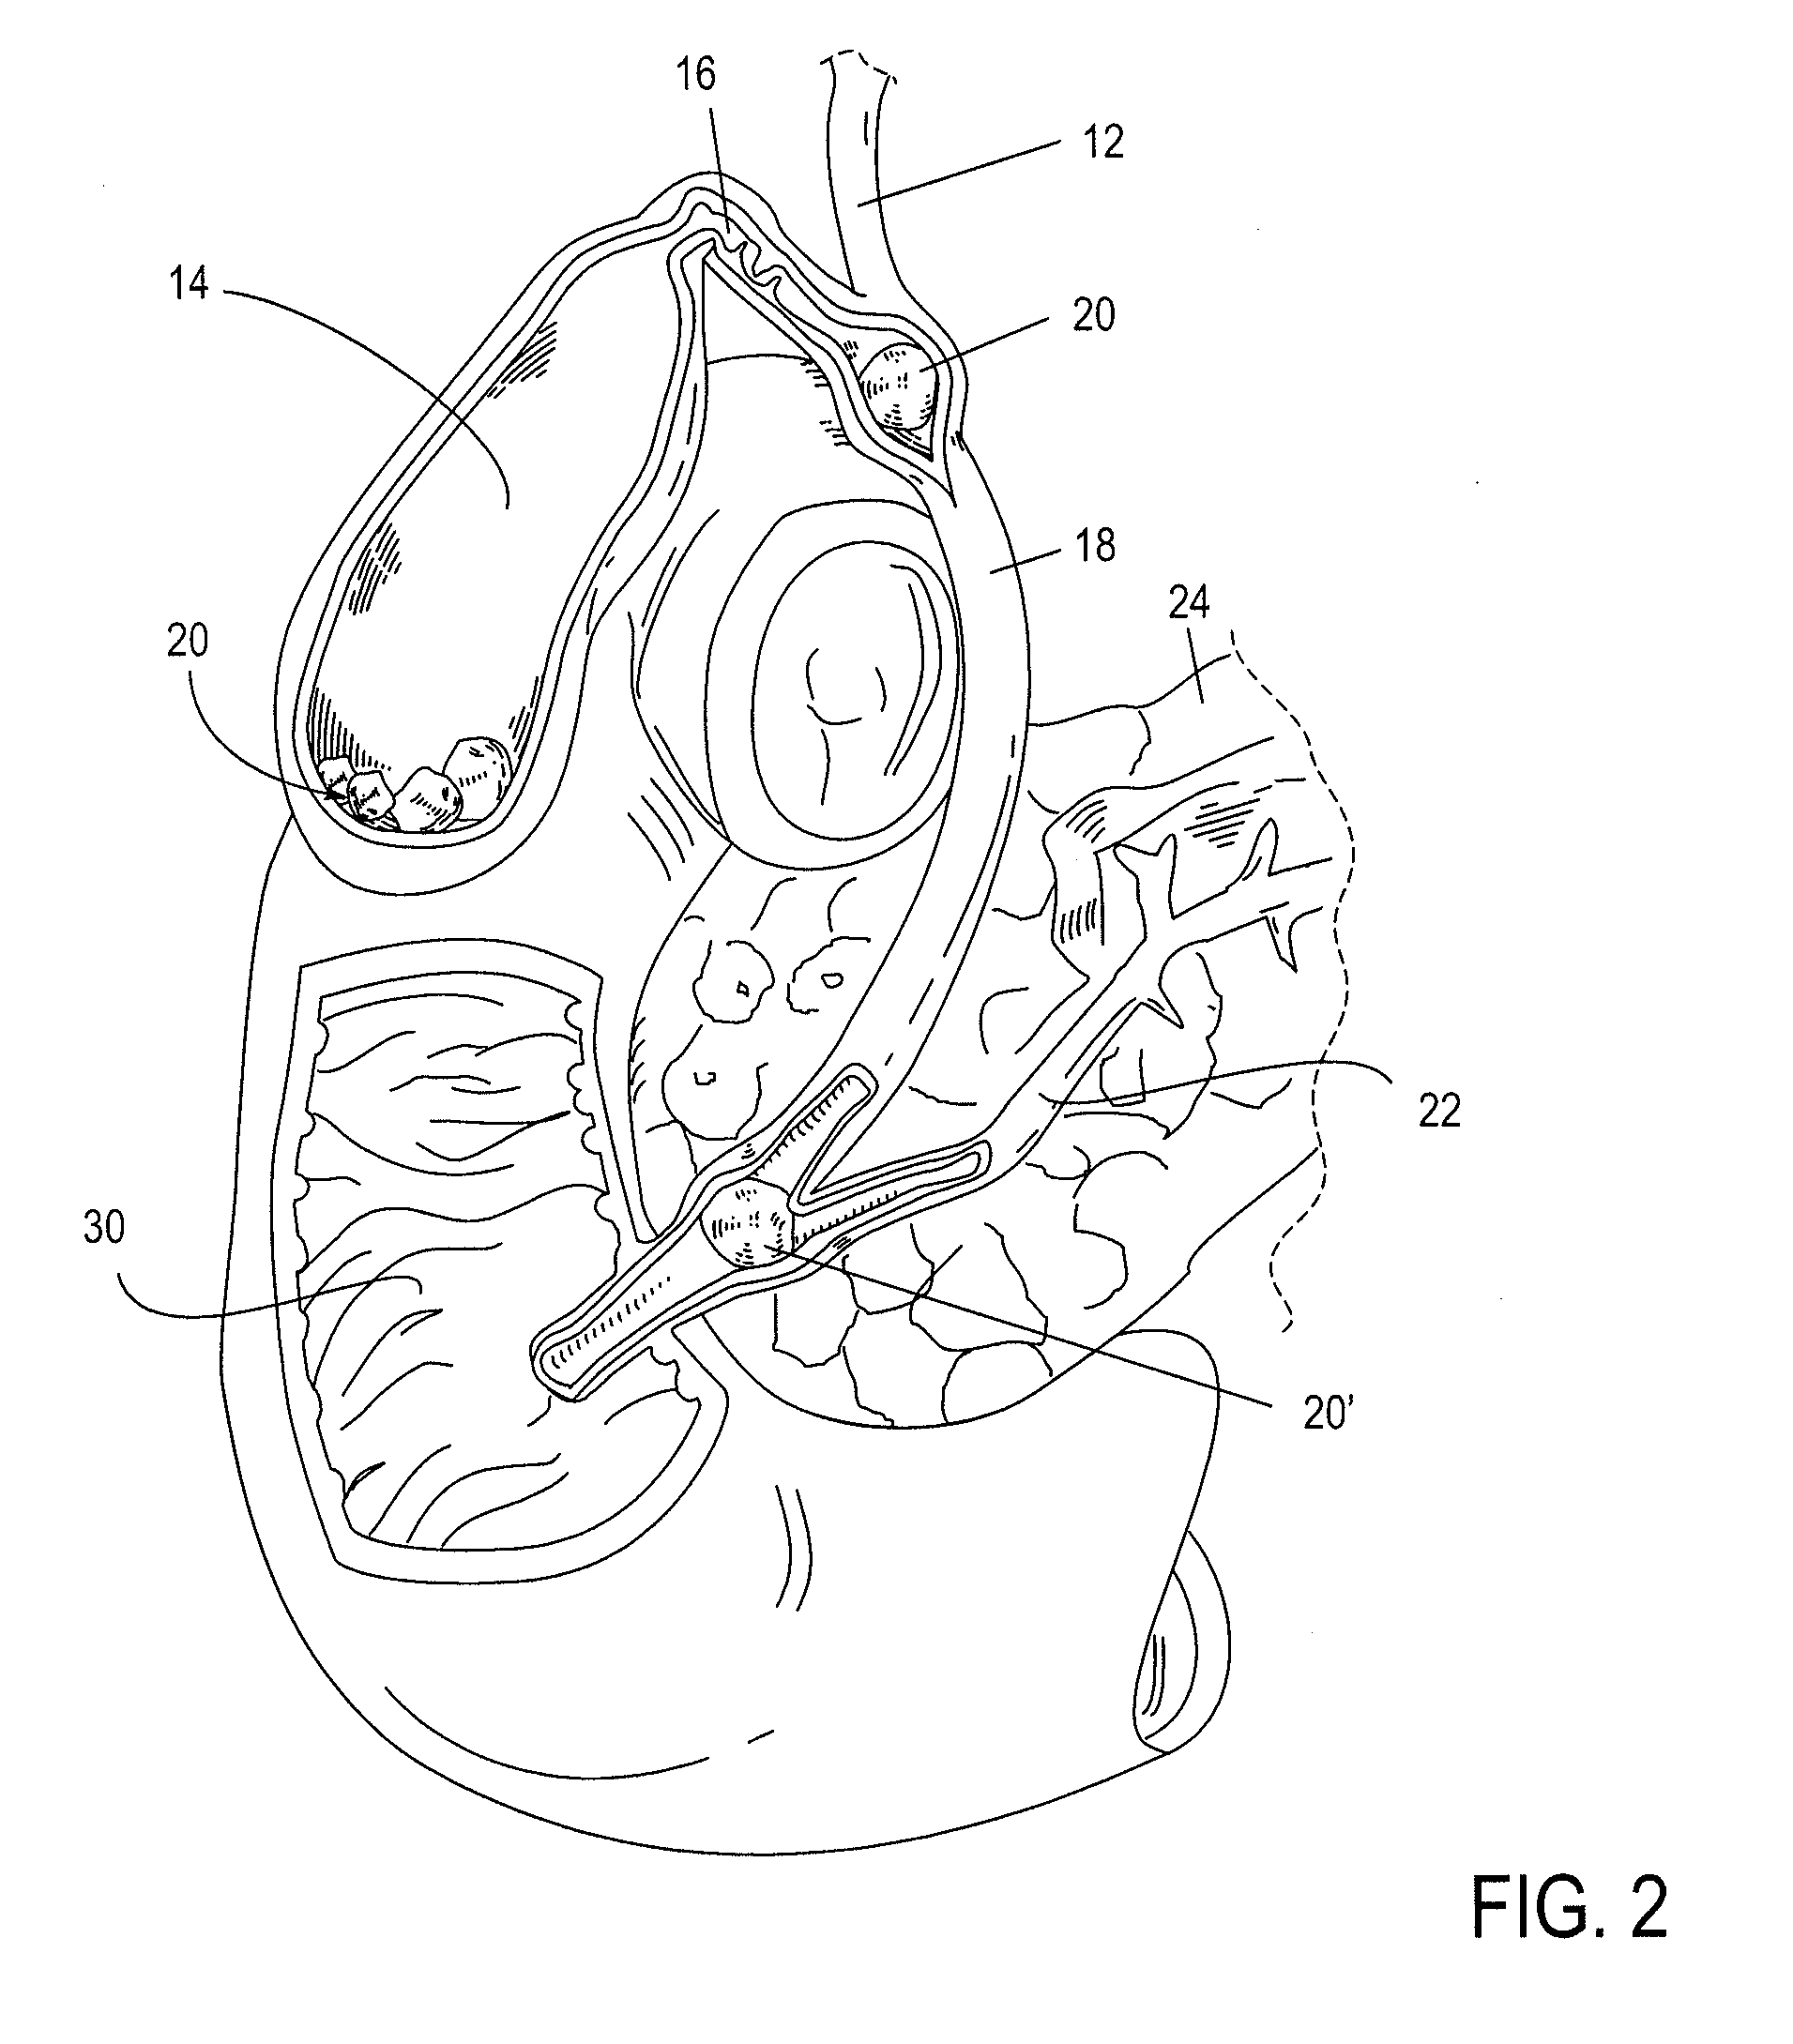 Biliary shunts, delivery systems, and methods of using the same